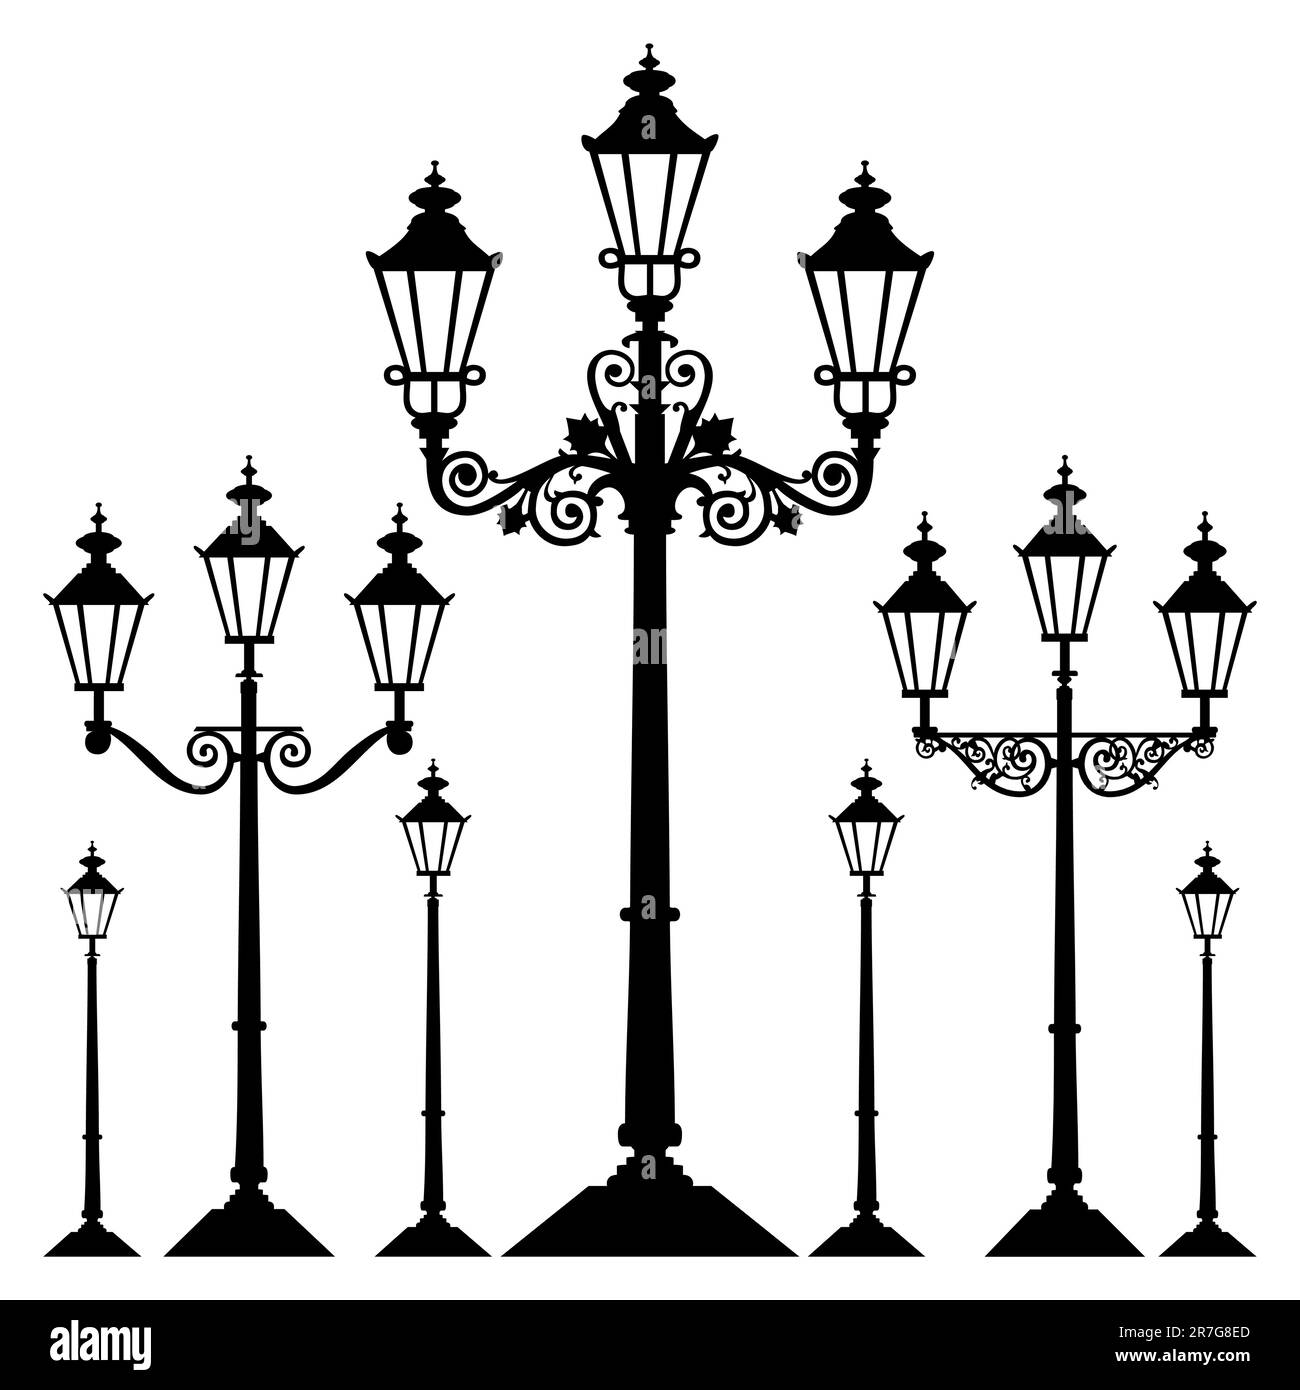 Set of antique retro street light lamps, isolated on white background,  full scalable vector graphic. Stock Vector